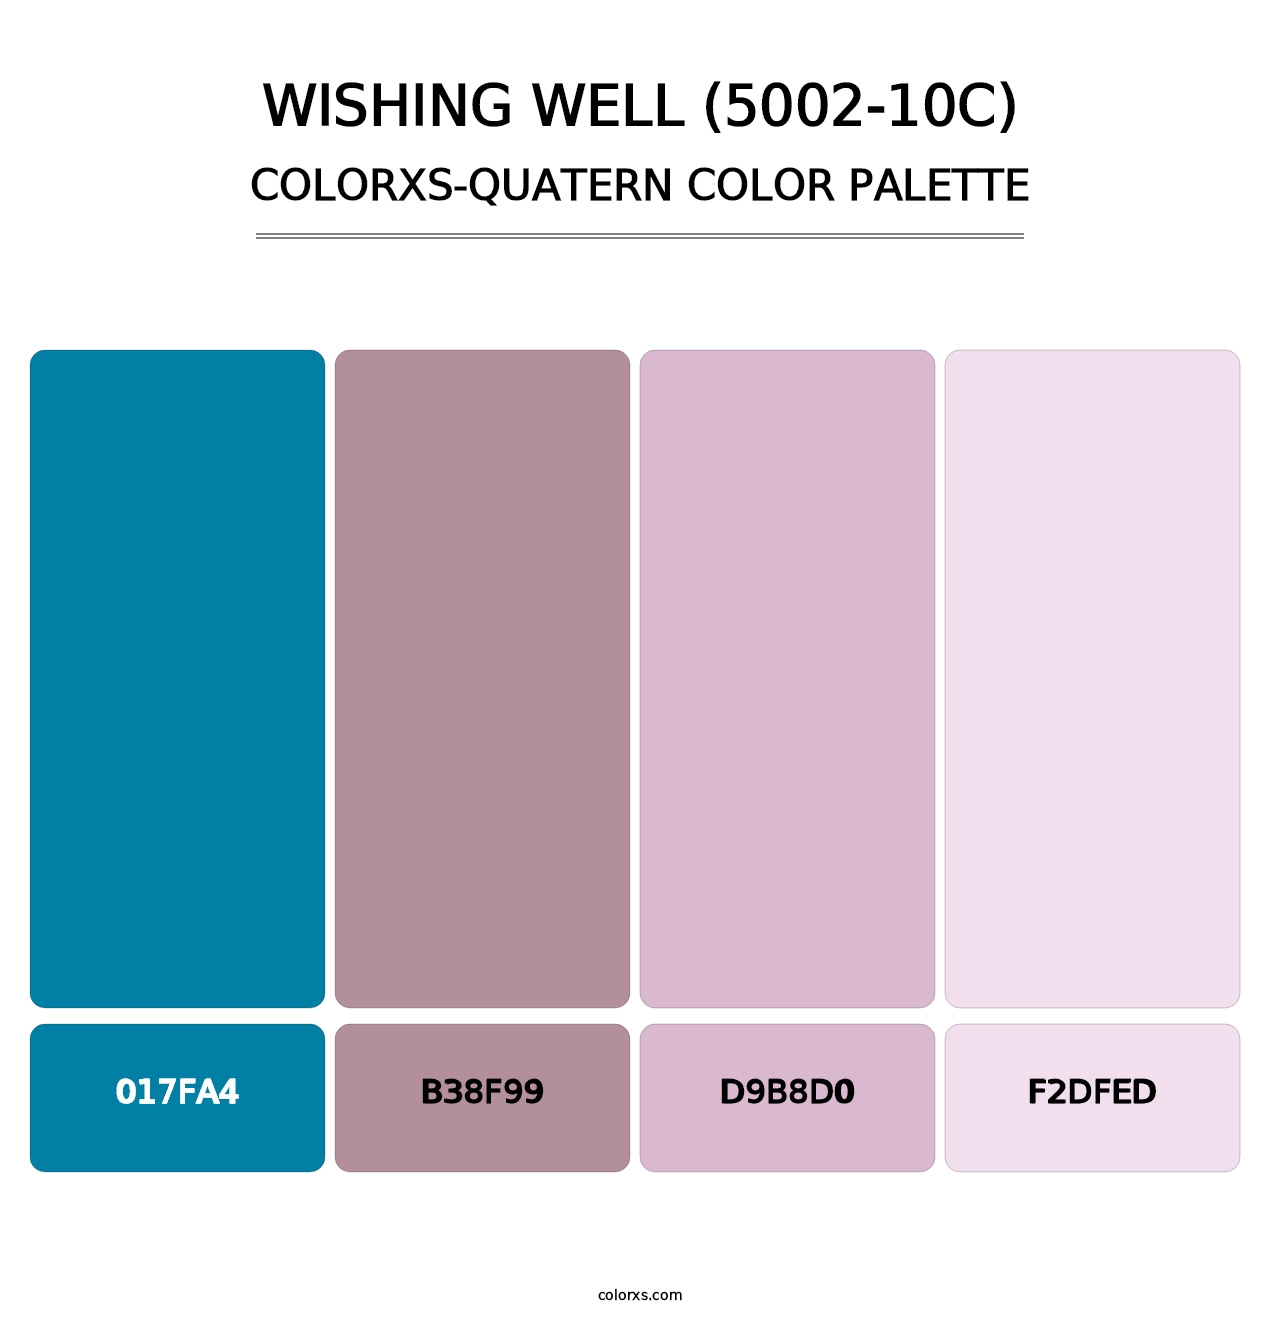 Wishing Well (5002-10C) - Colorxs Quatern Palette